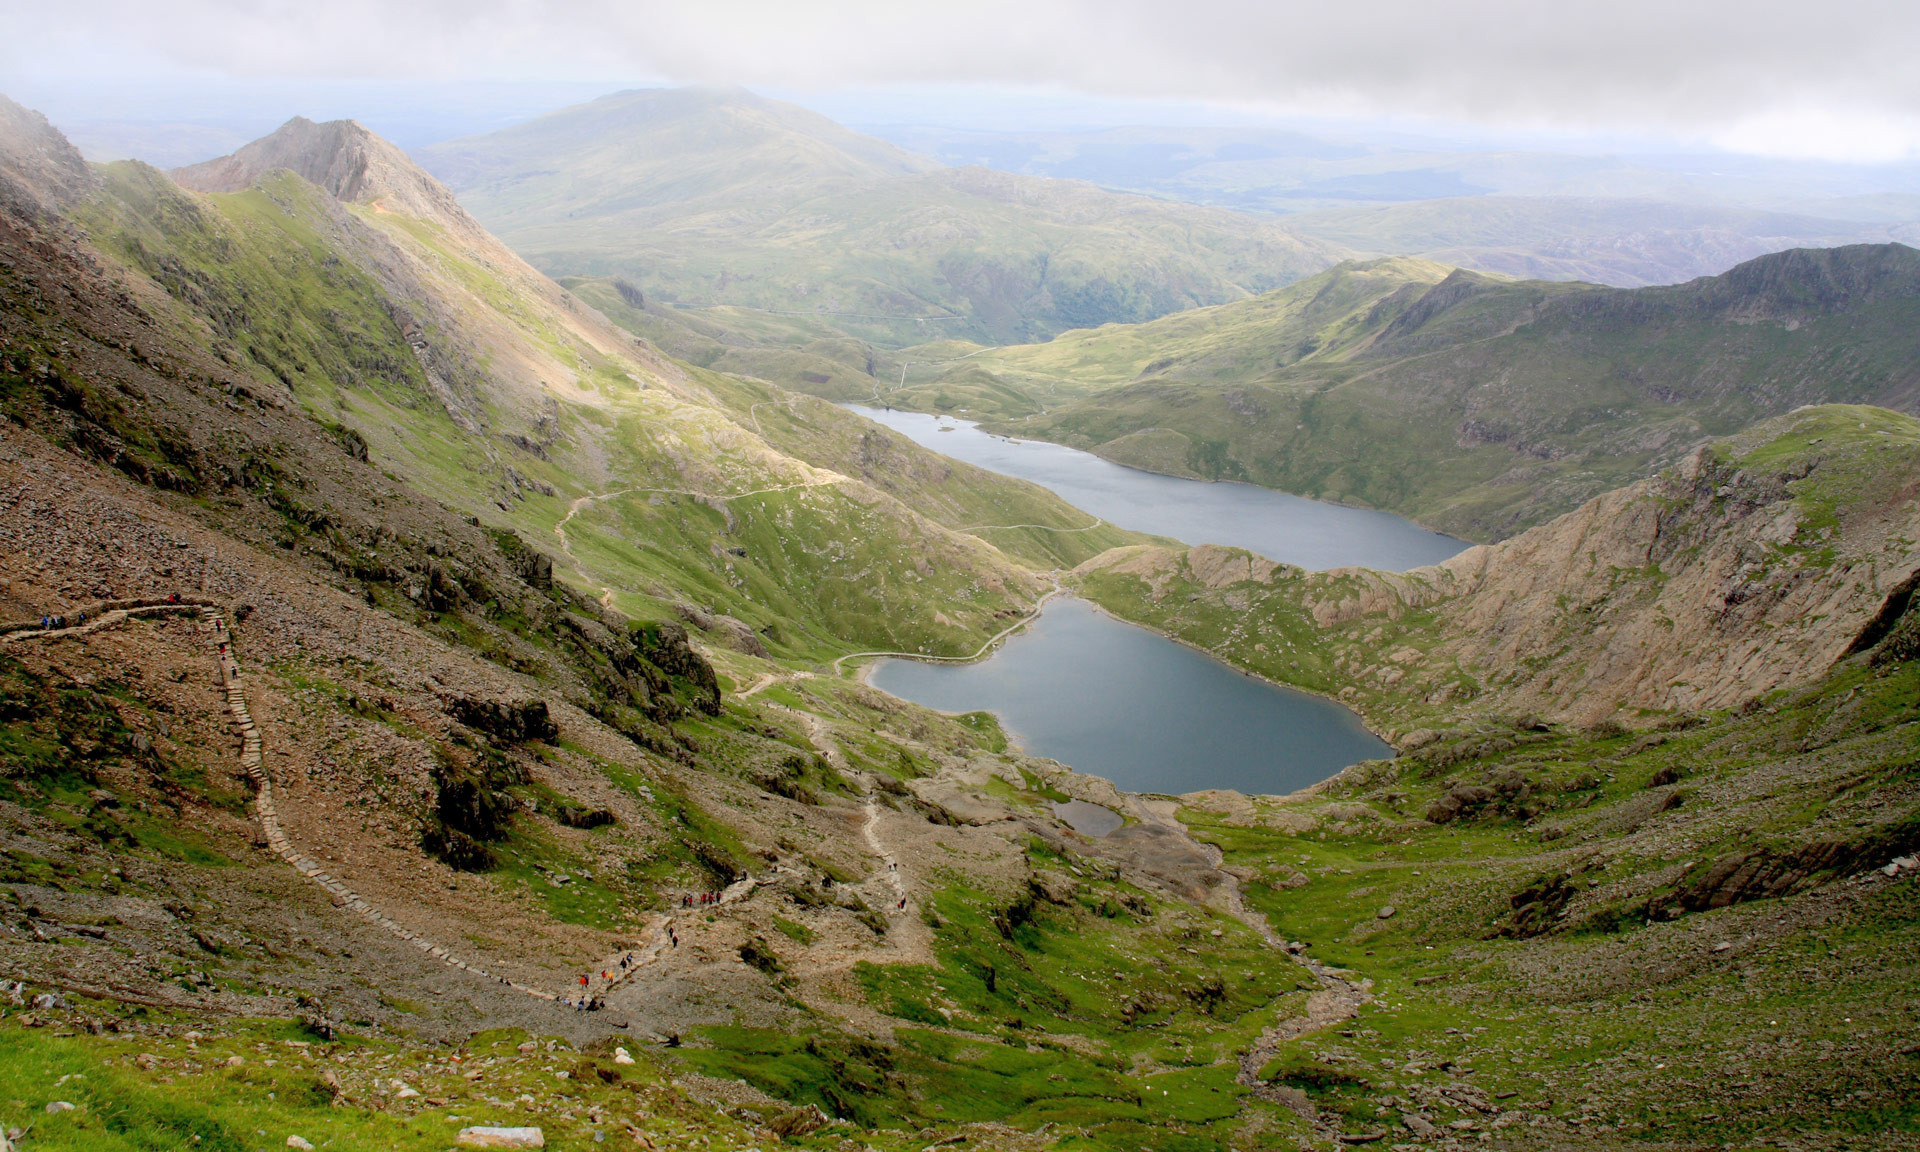 View of Pyg and Miners' track ascending past the southern lakes of Snowdon